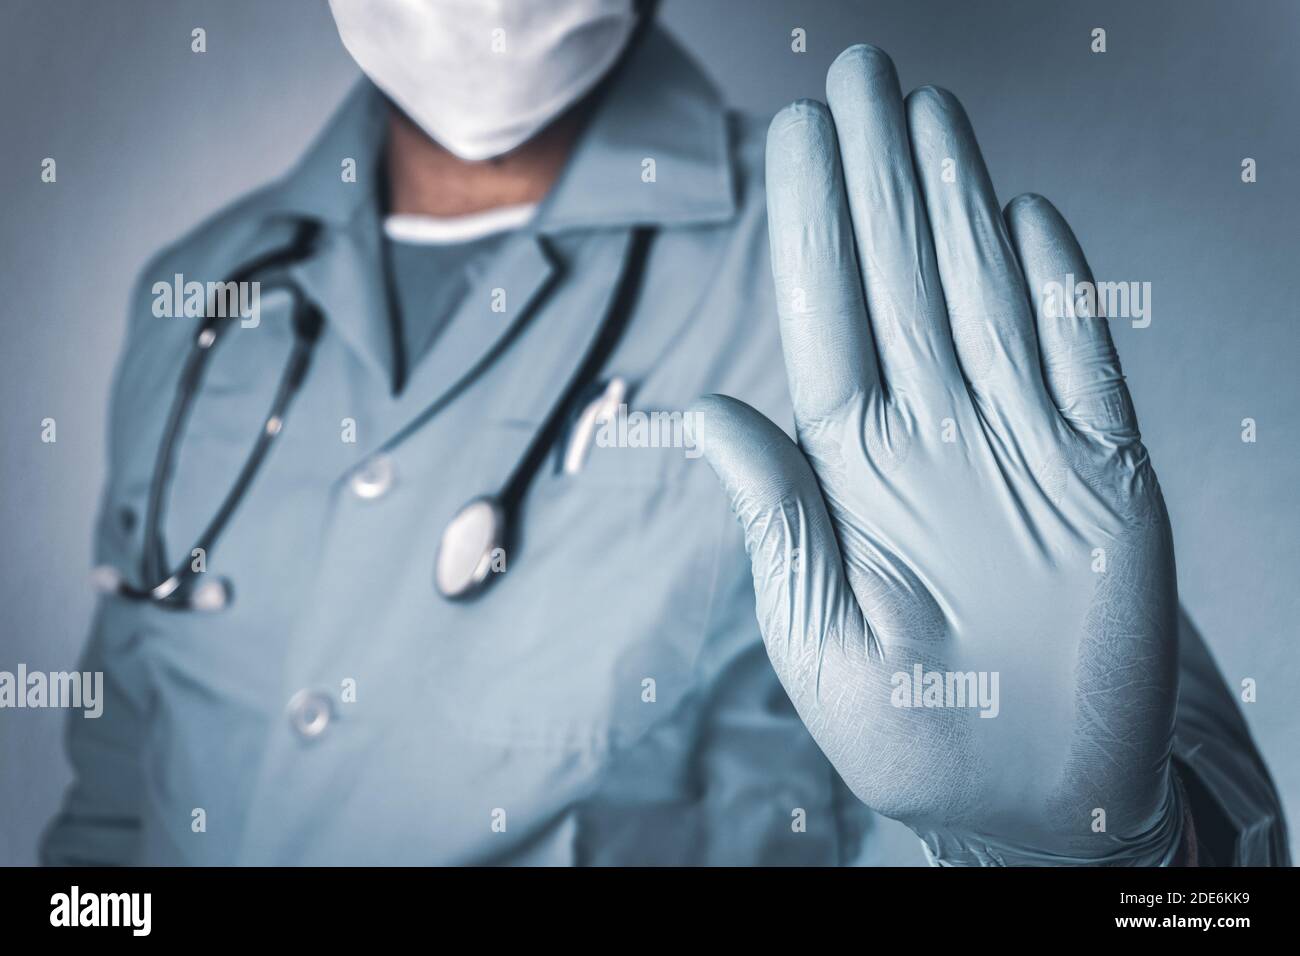 Hand stop sign. Doctor wearing medical mask and gloves. Coronavirus, Covid-19 concept and background. Stock Photo